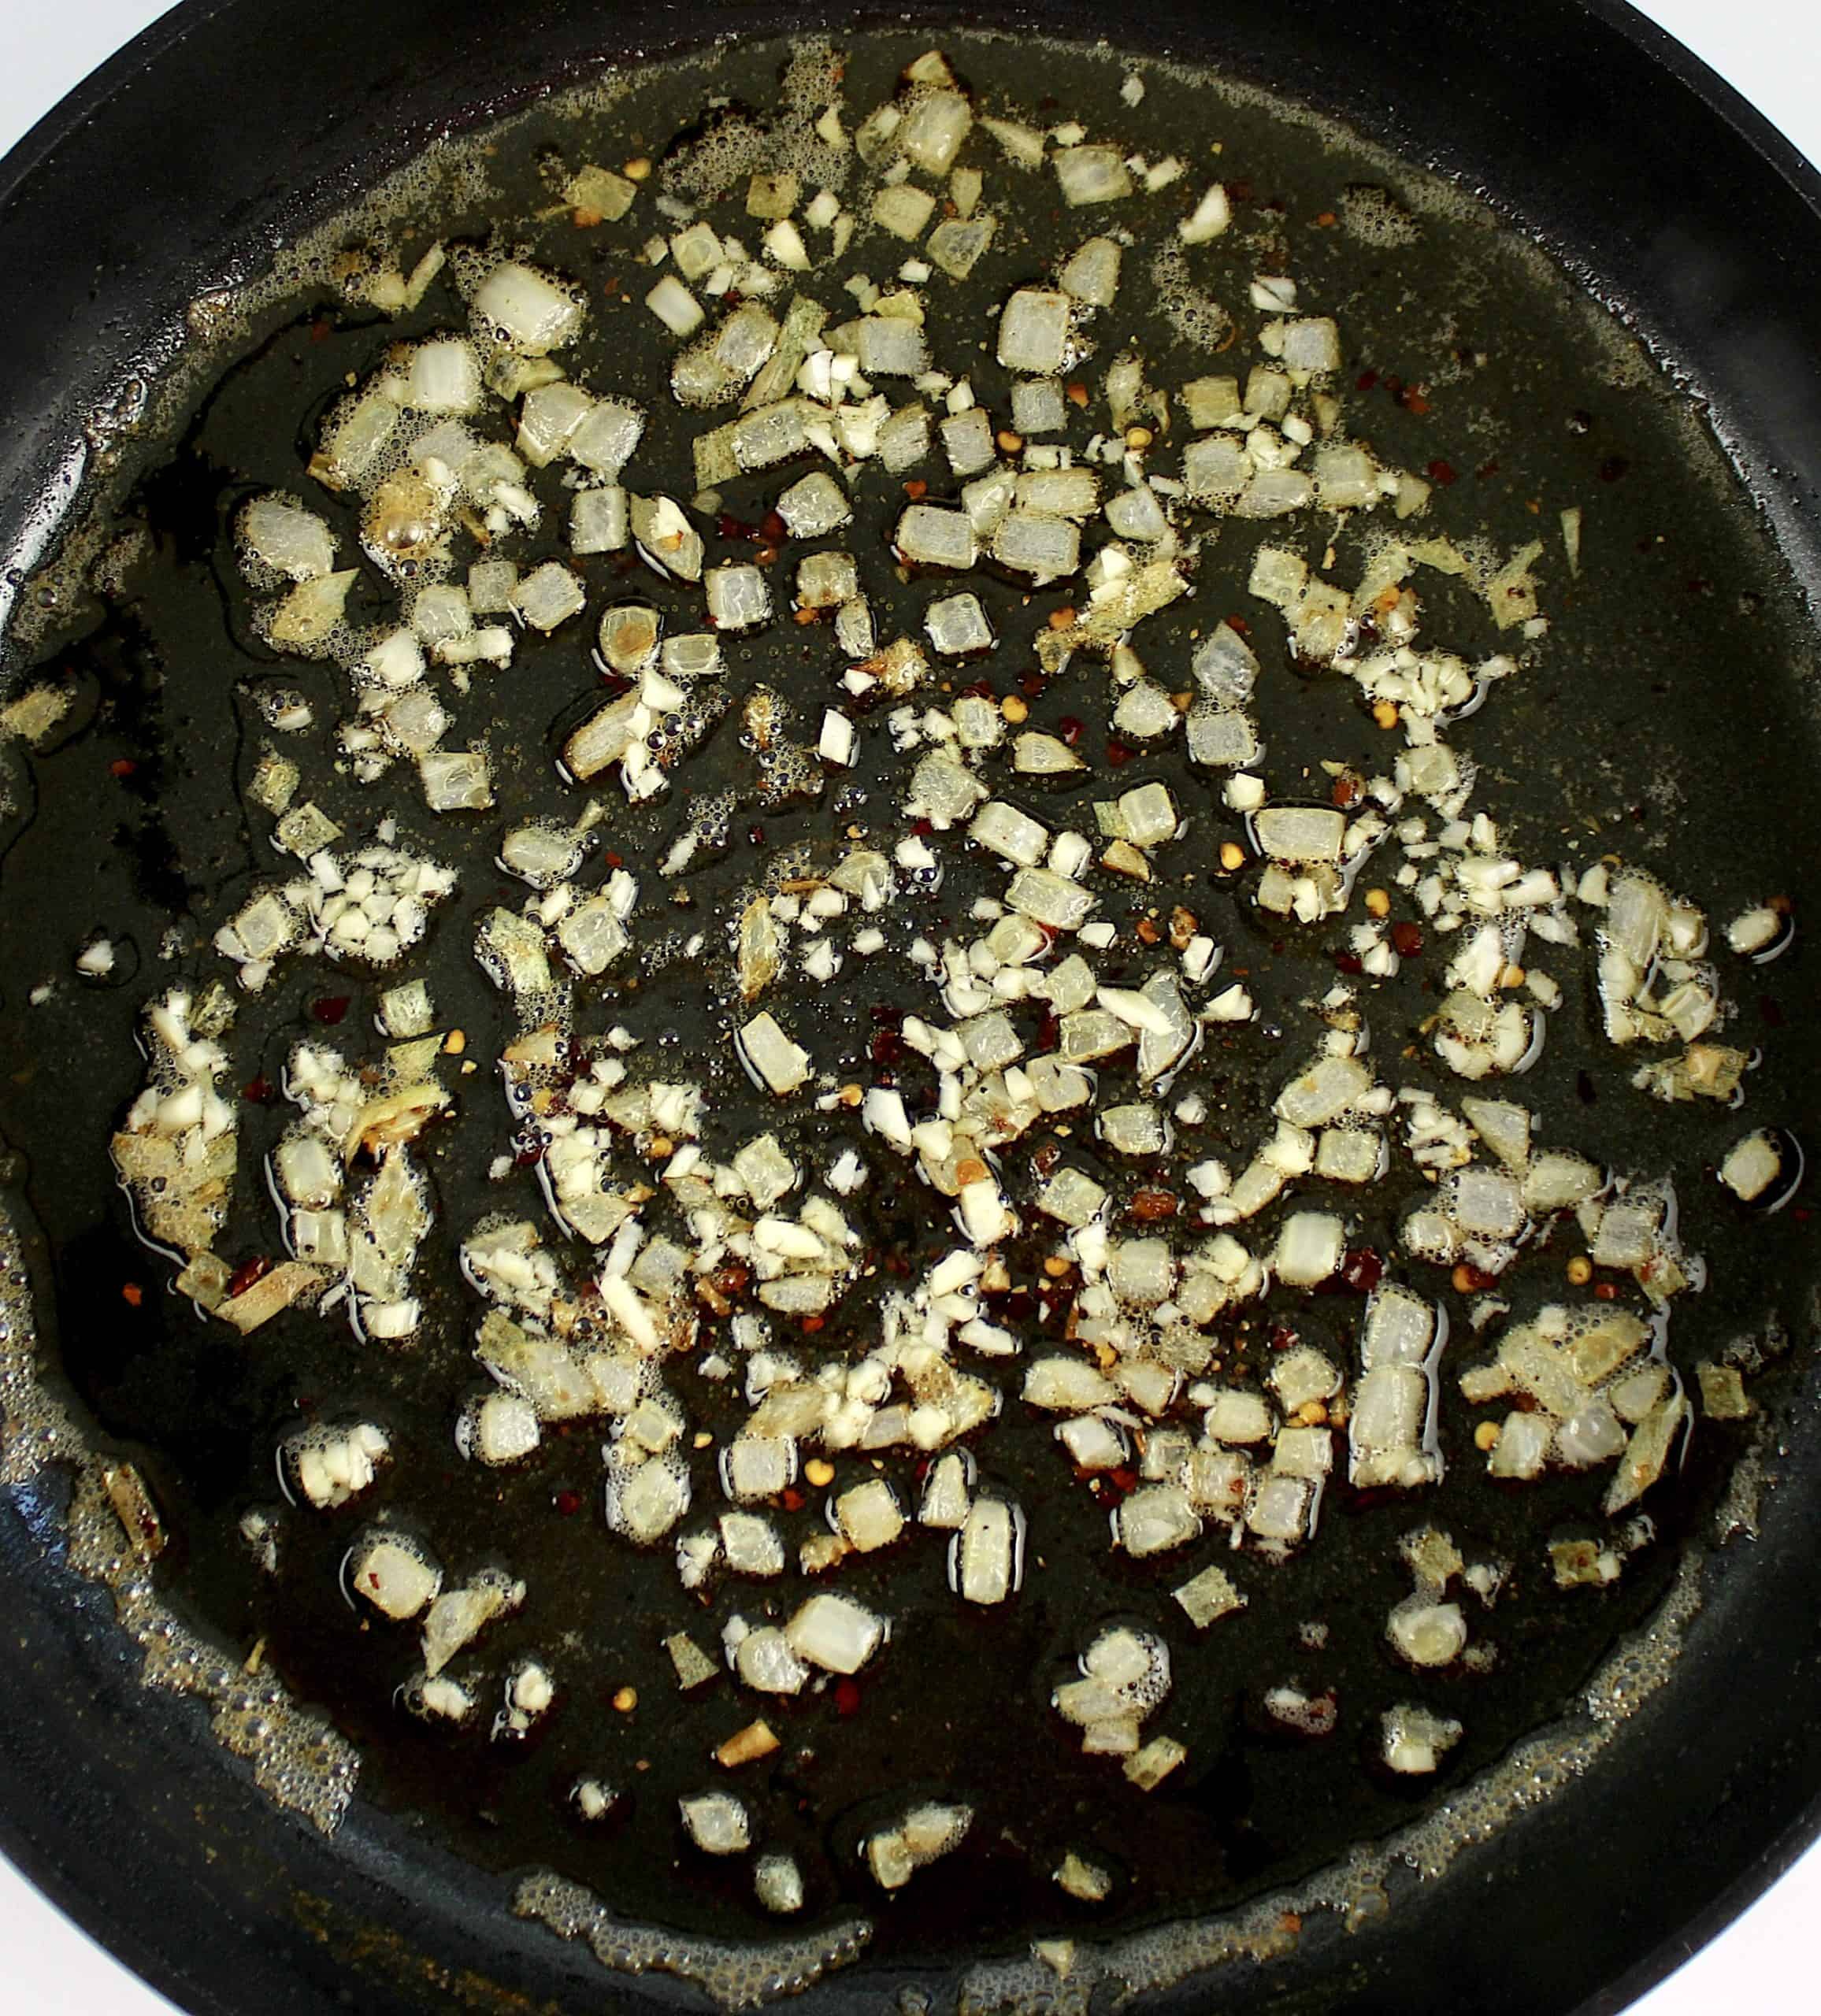 chopped onion and garlic in skillet